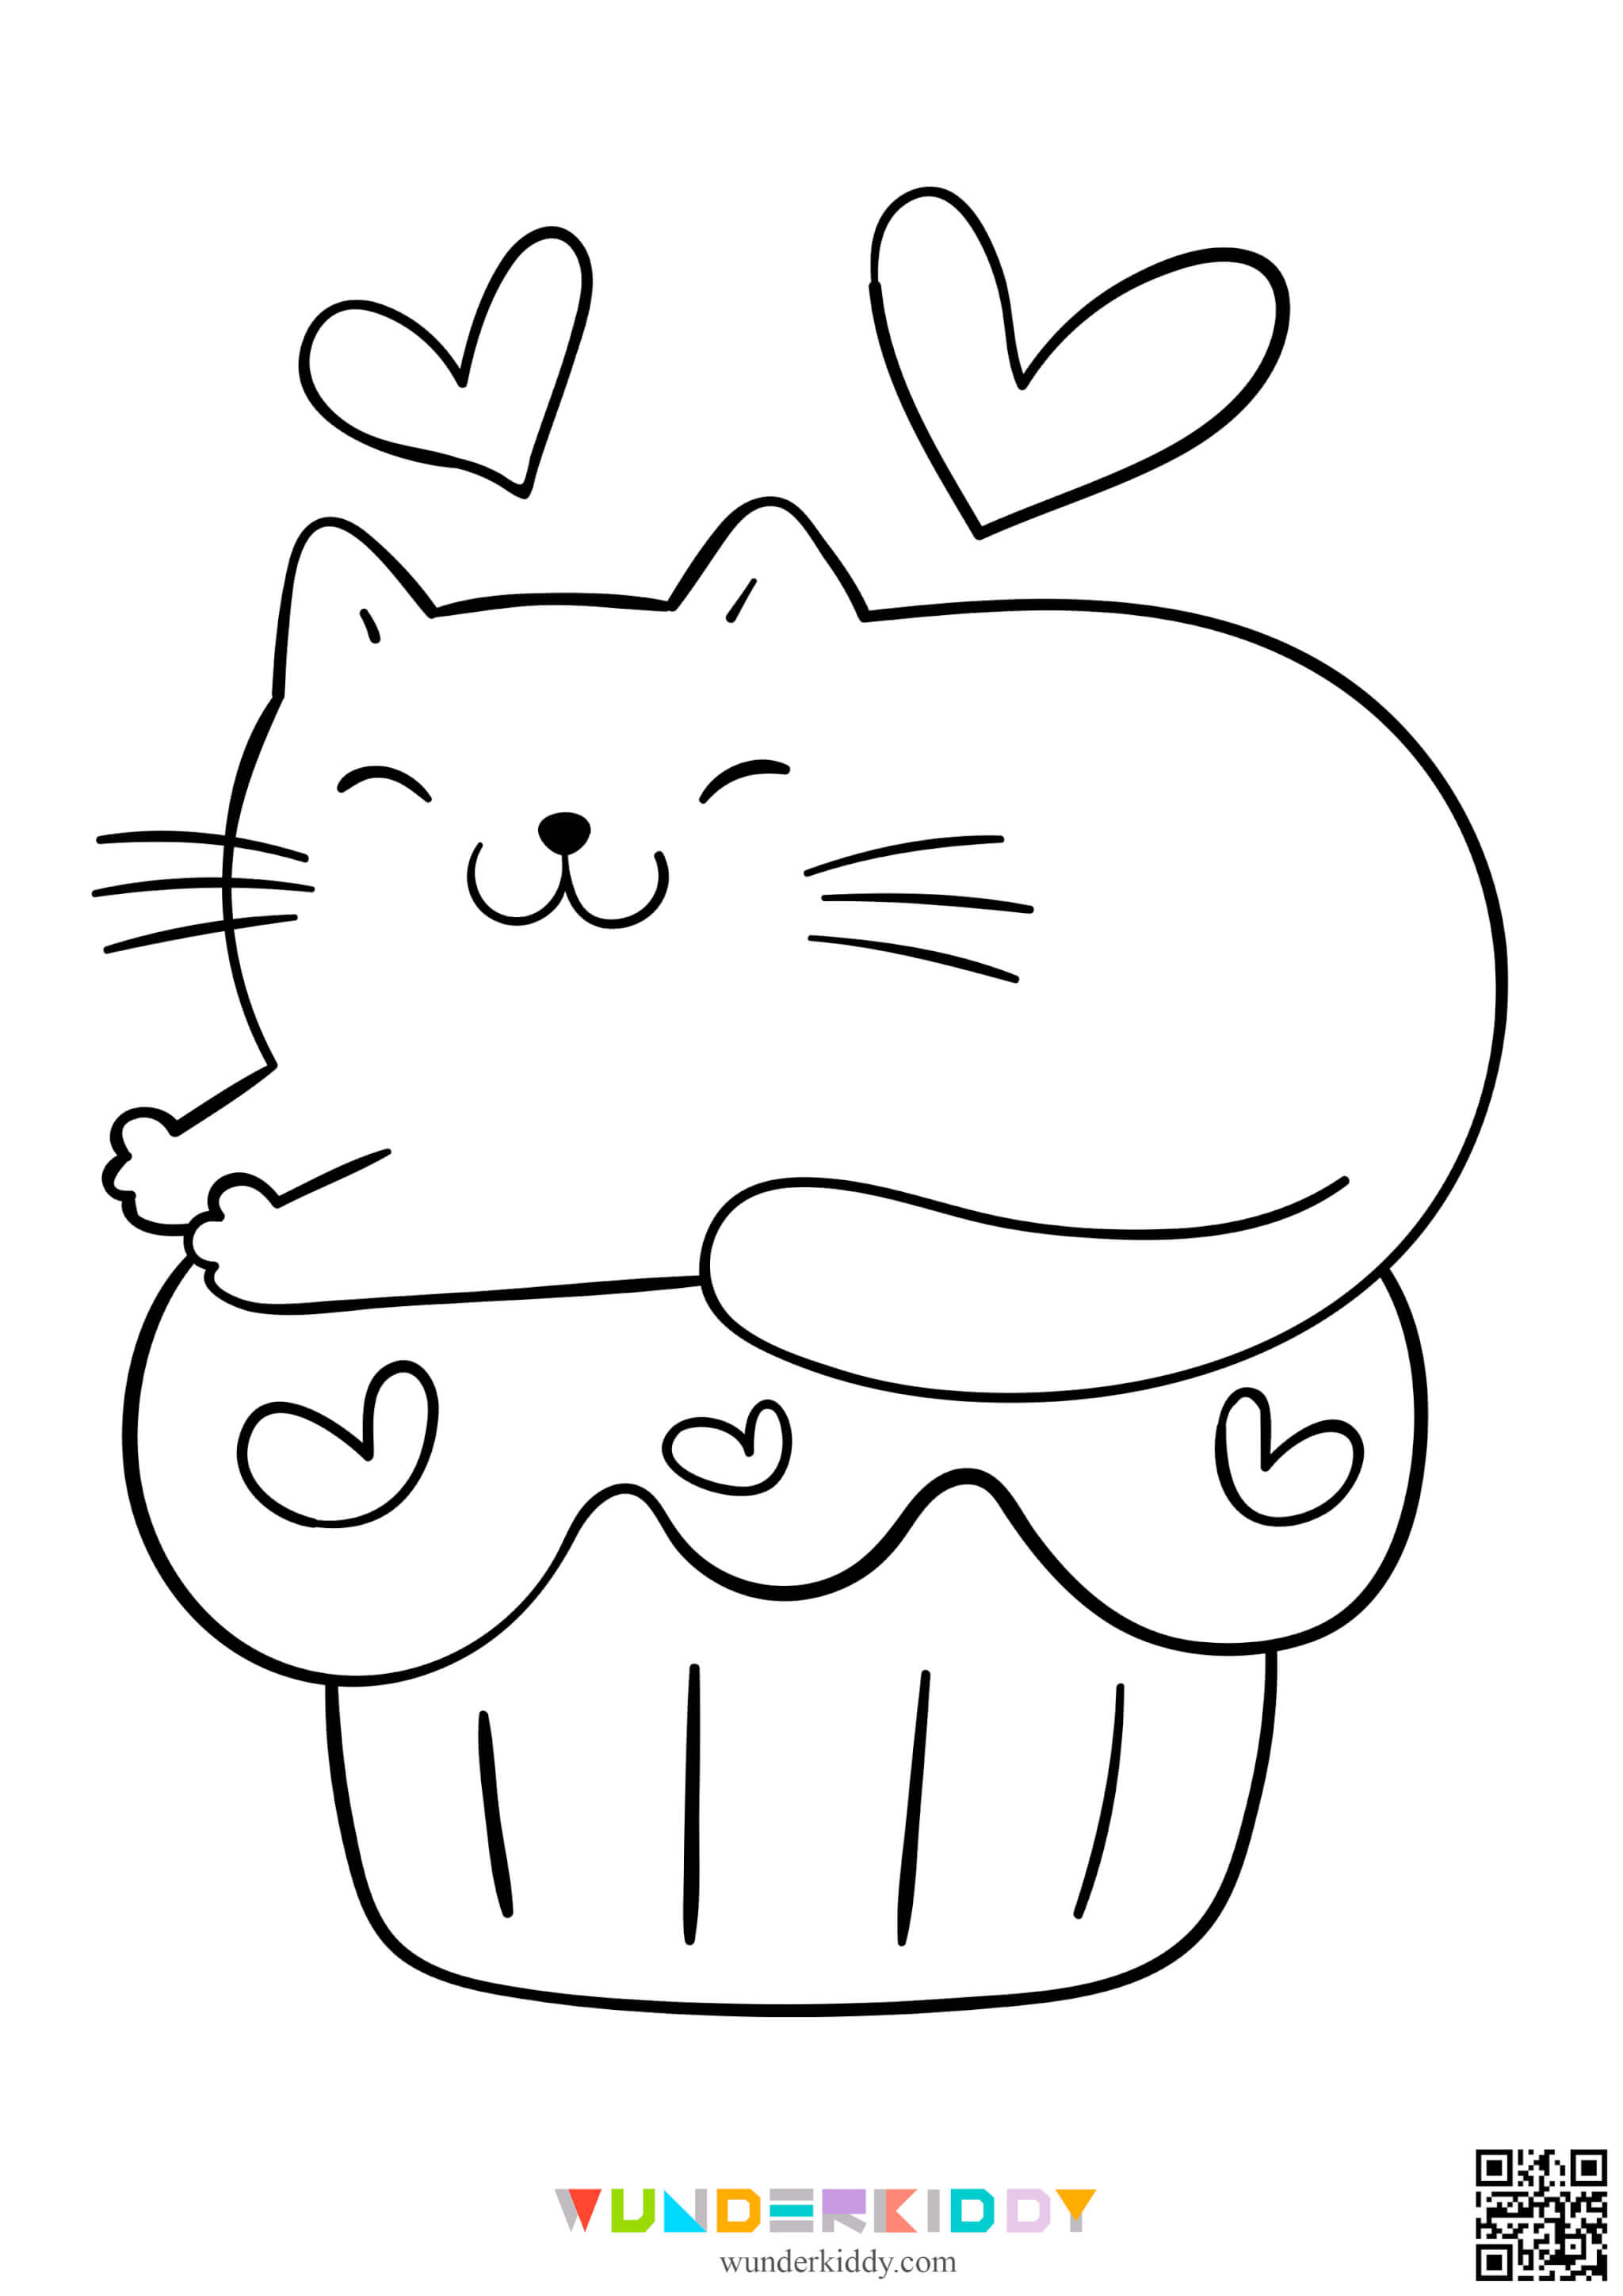 Valentines Coloring Pages - Image 13